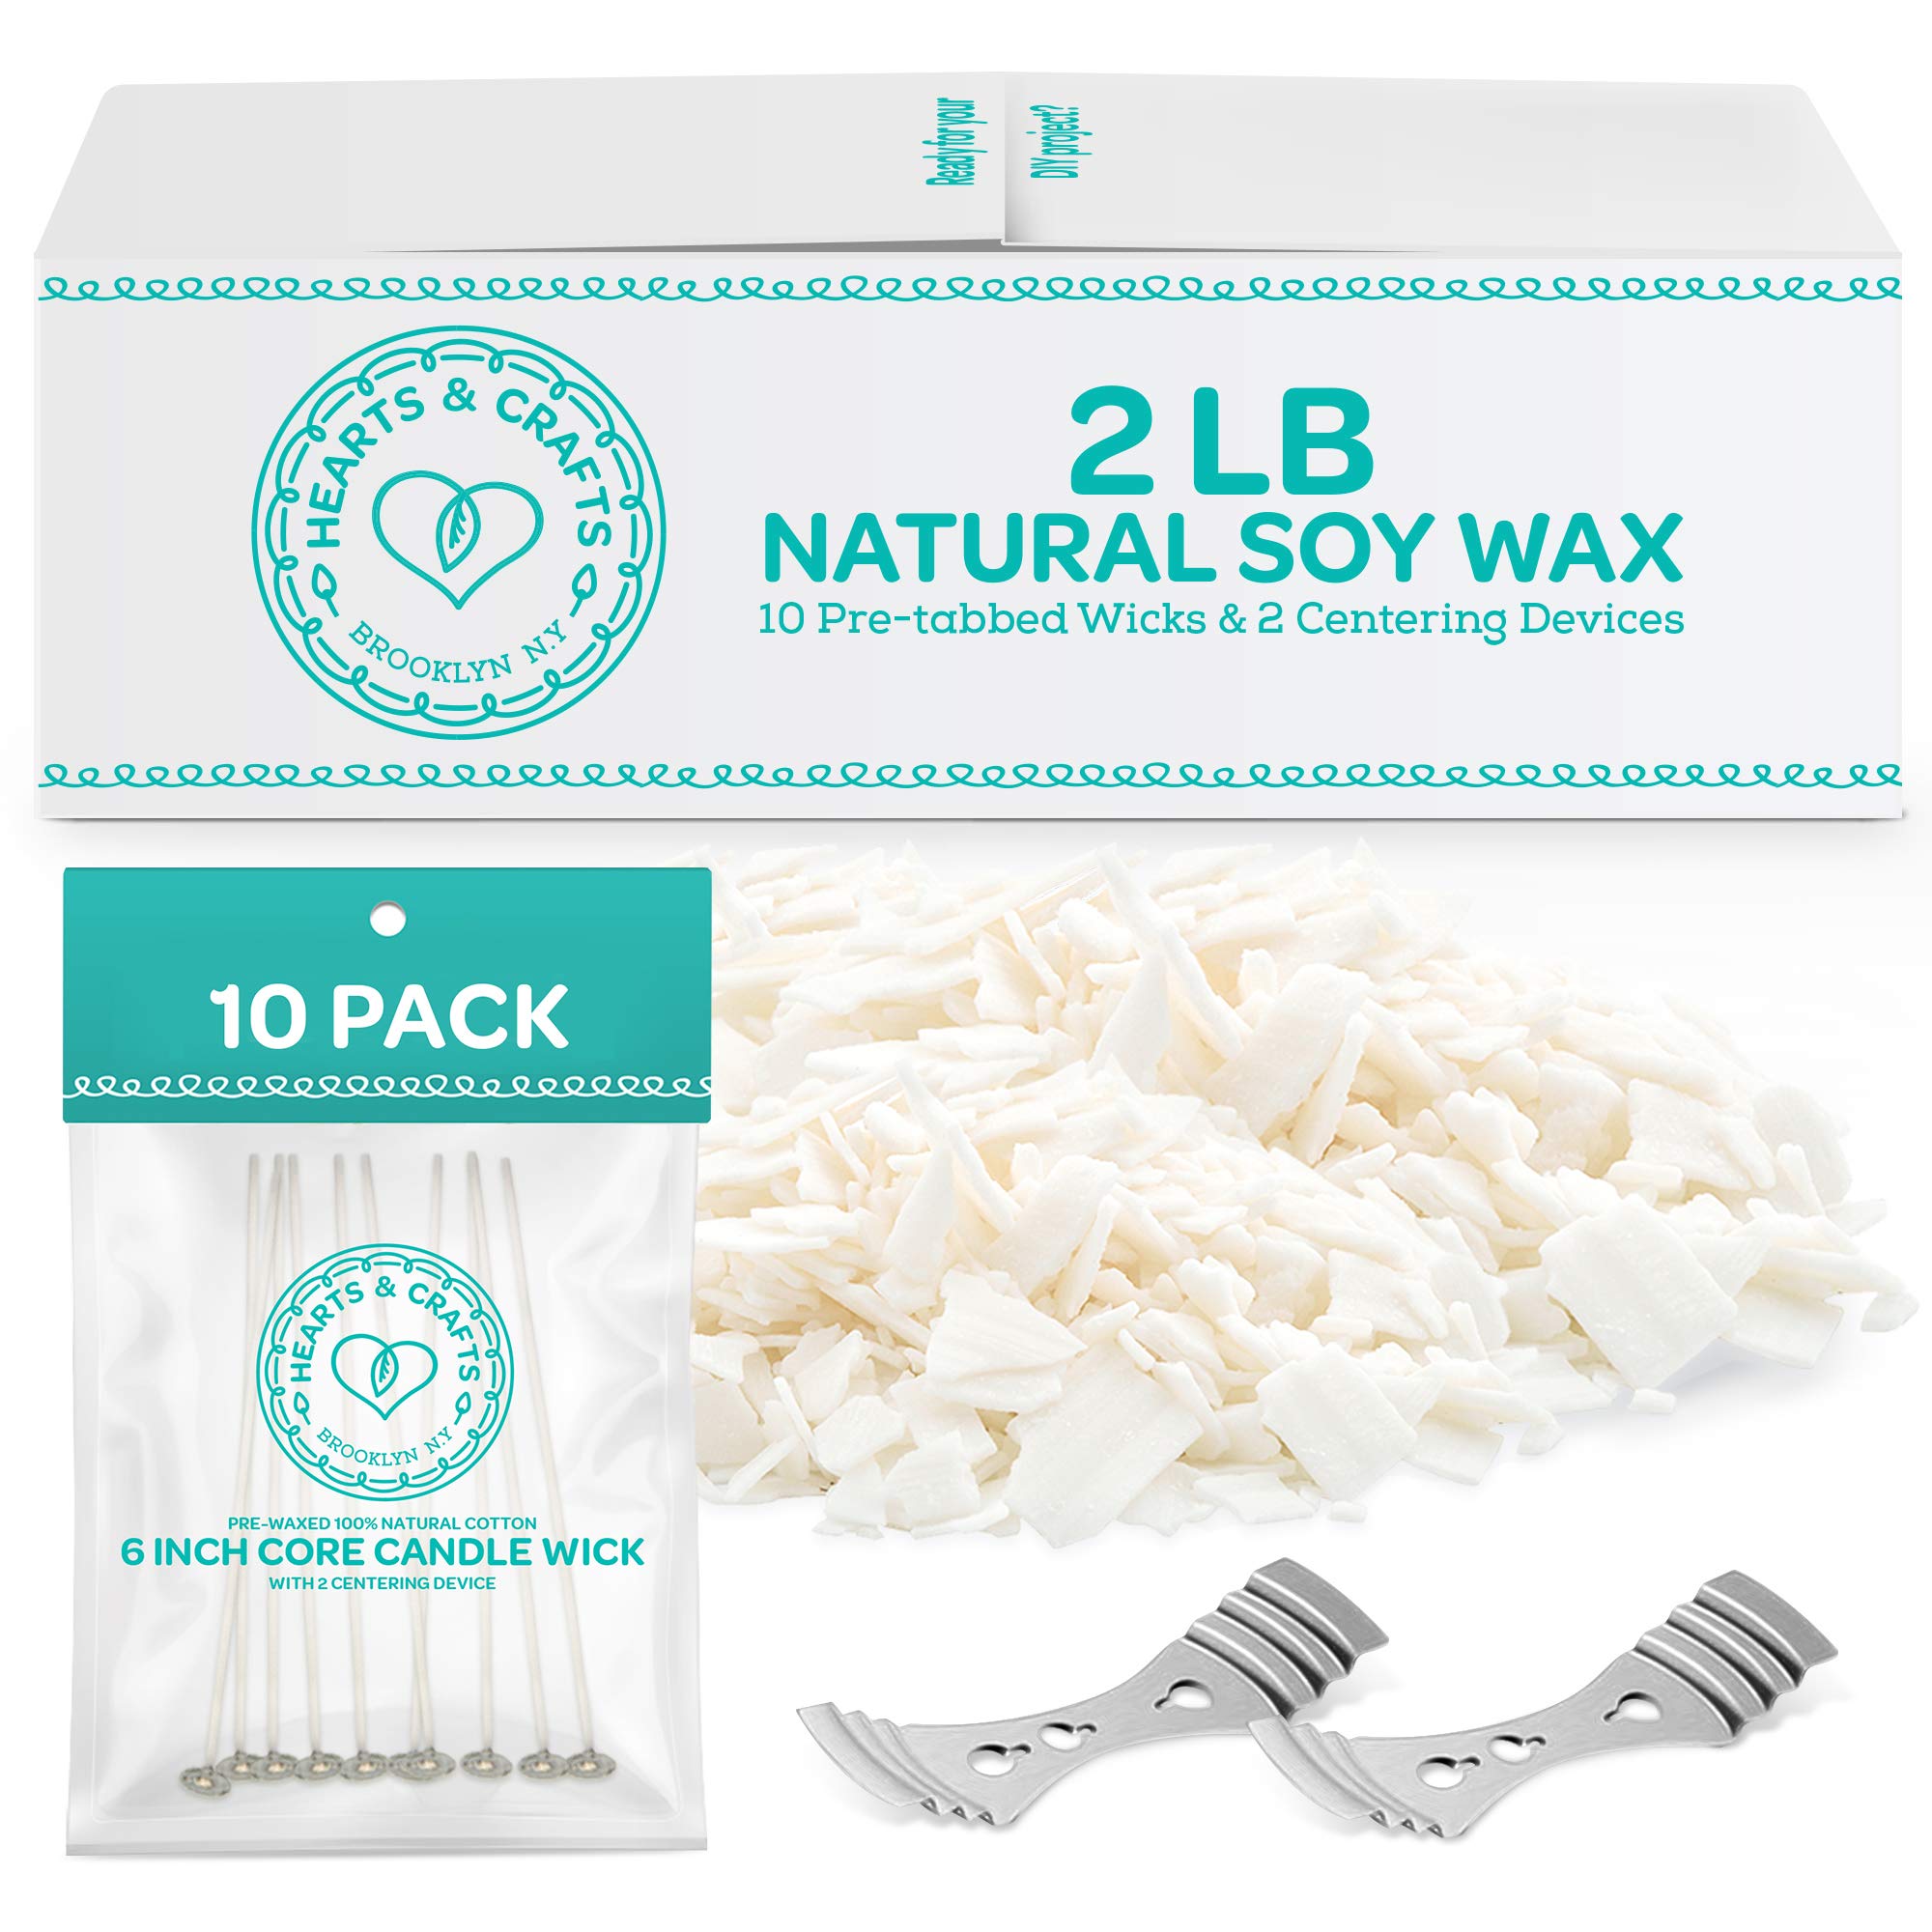 Hearts & Crafts Natural Soy Wax for Candle Making - 2 lbs Natural Soy Wax - 10 6-Inch Pre-Waxed Candle Wicks, 2 Metal Centering Devices, 2 lbs Soy Wax Flakes - Candle Wax & Candle Making Wax Supplies  - Like New